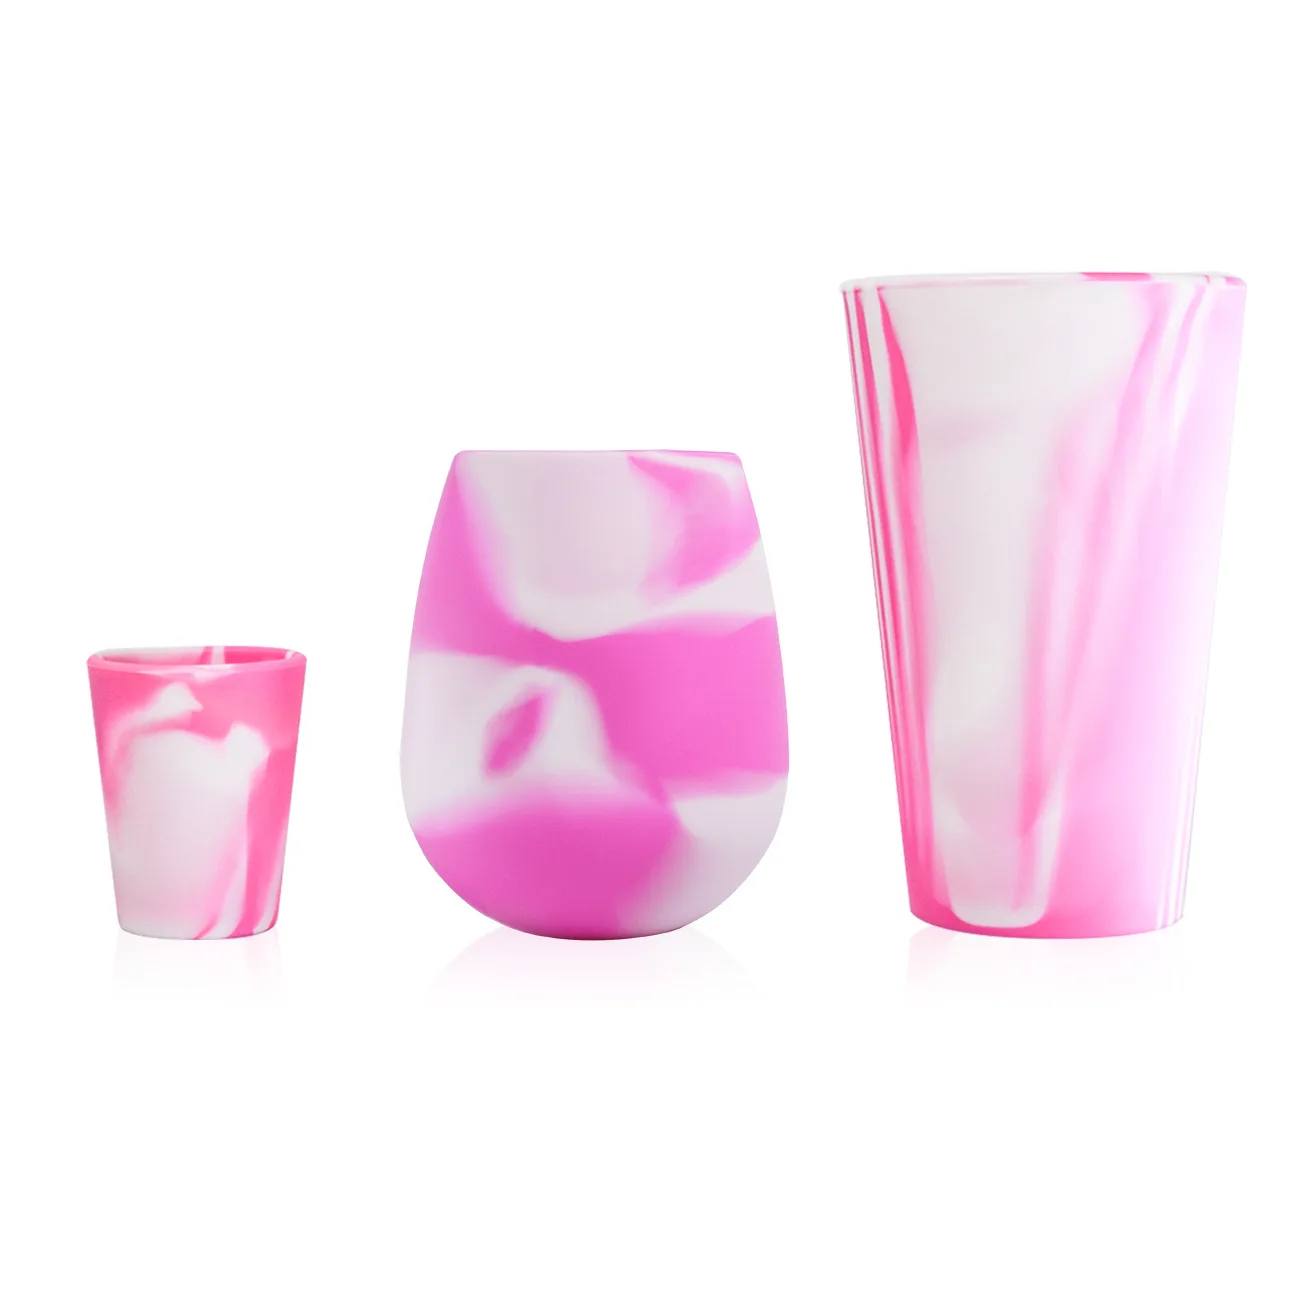 SiliSips: Your Rainbow of BPA-Free Silicone Cups Made In The USA